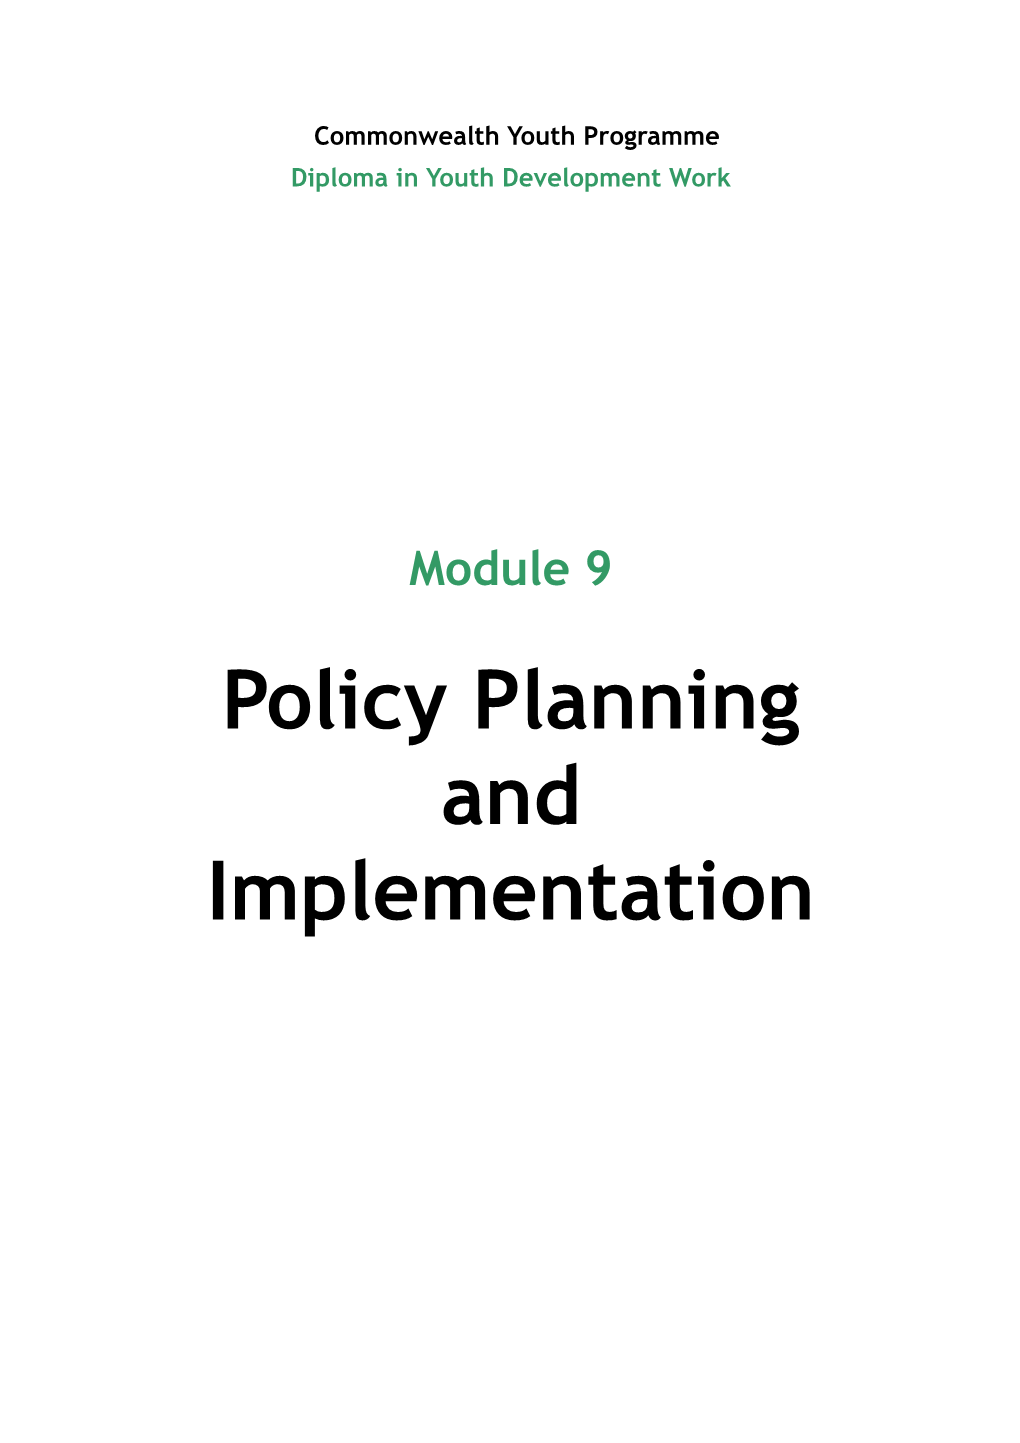 Module-9 Title: Policy Planning and Implementation